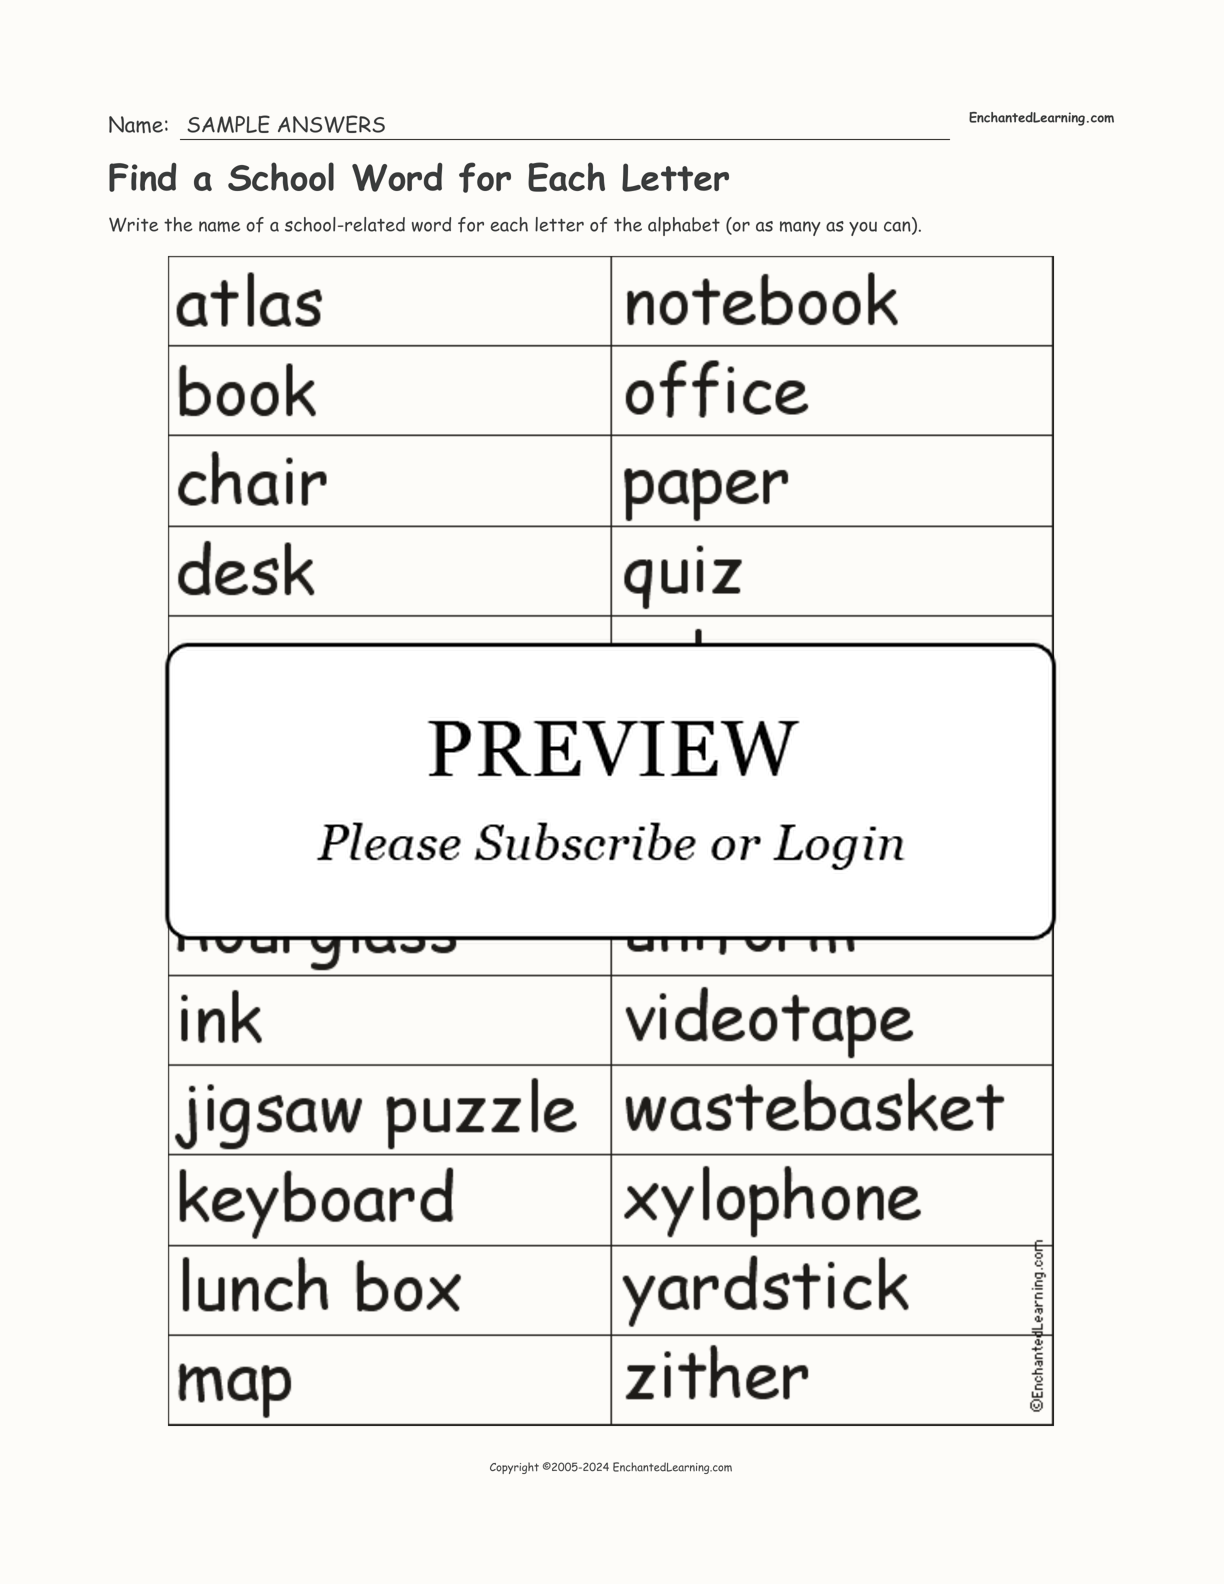 Find a School Word for Each Letter interactive worksheet page 2